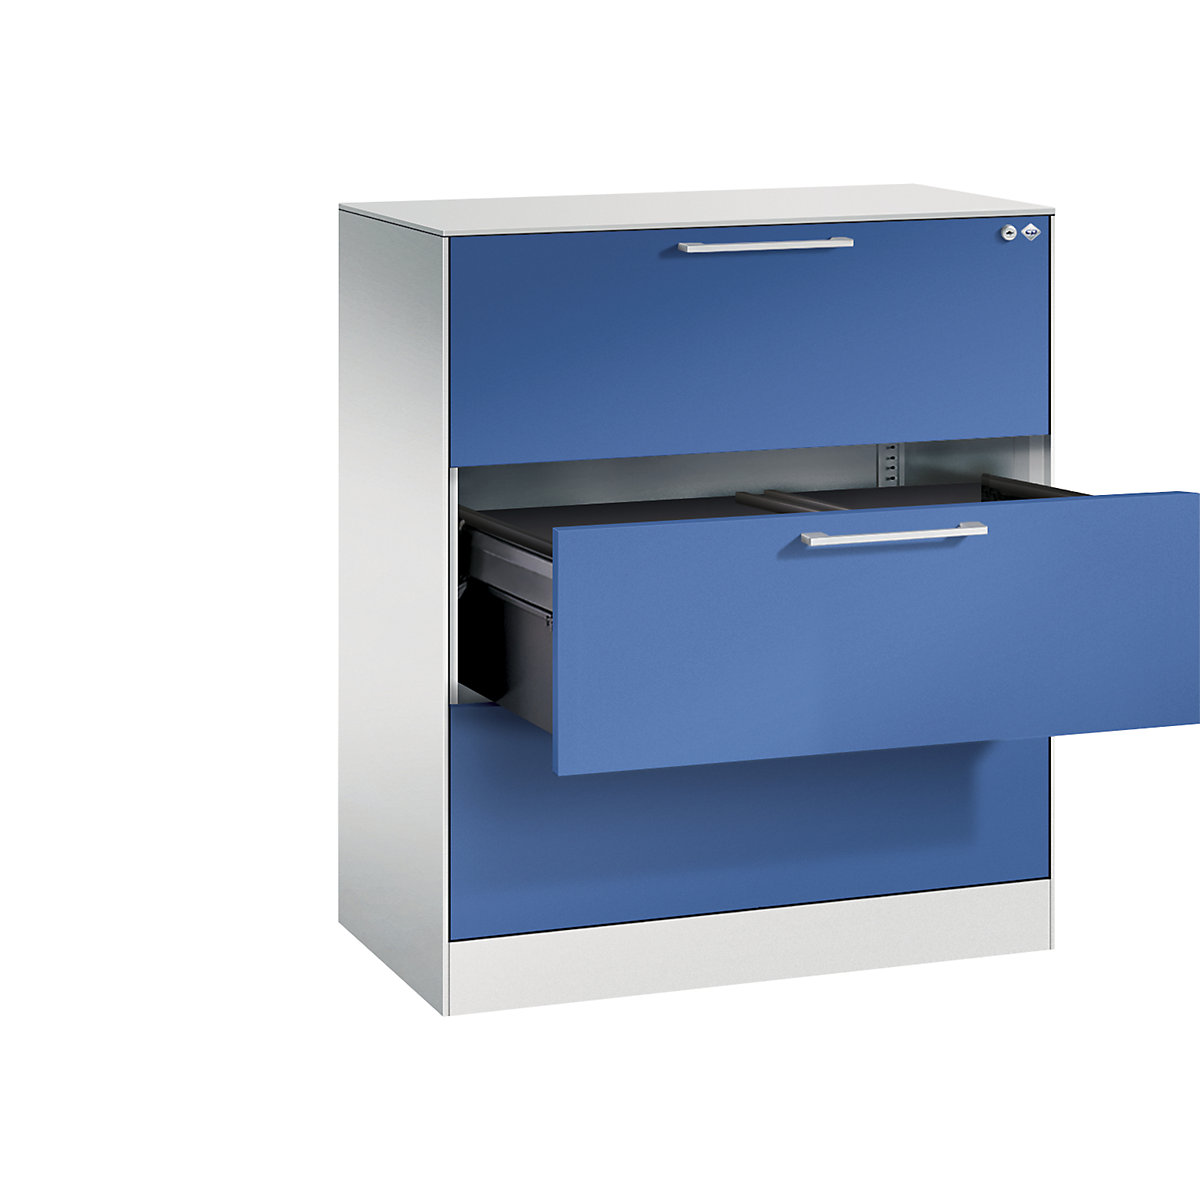 ASISTO suspension filing cabinet – C+P, width 800 mm, with 3 drawers, light grey/gentian blue-17